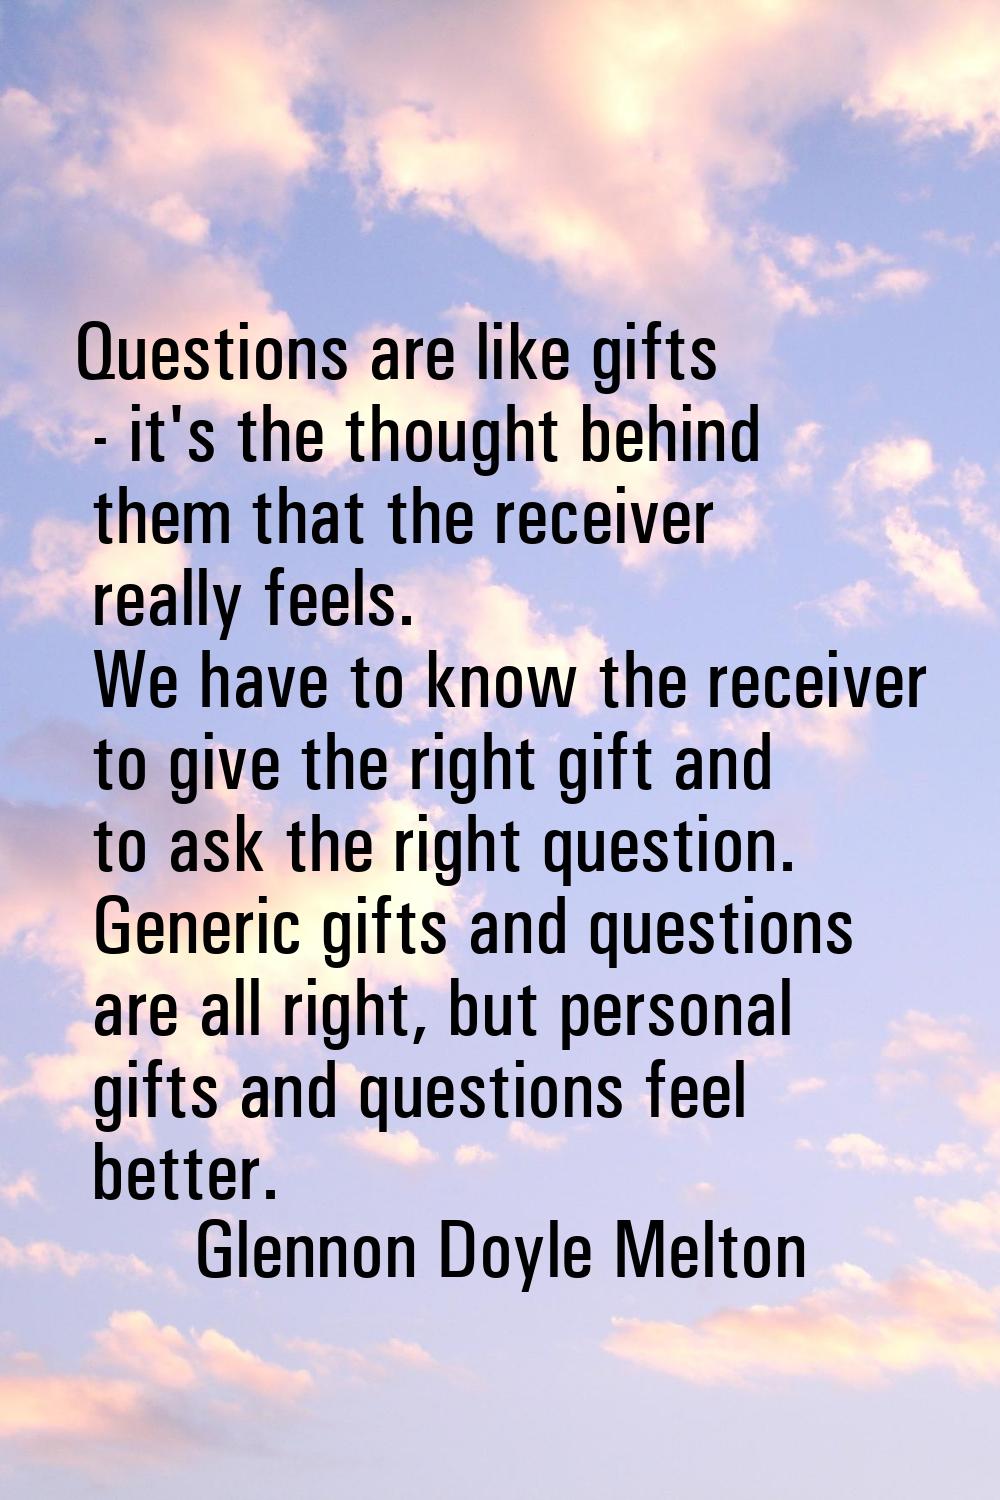 Questions are like gifts - it's the thought behind them that the receiver really feels. We have to 